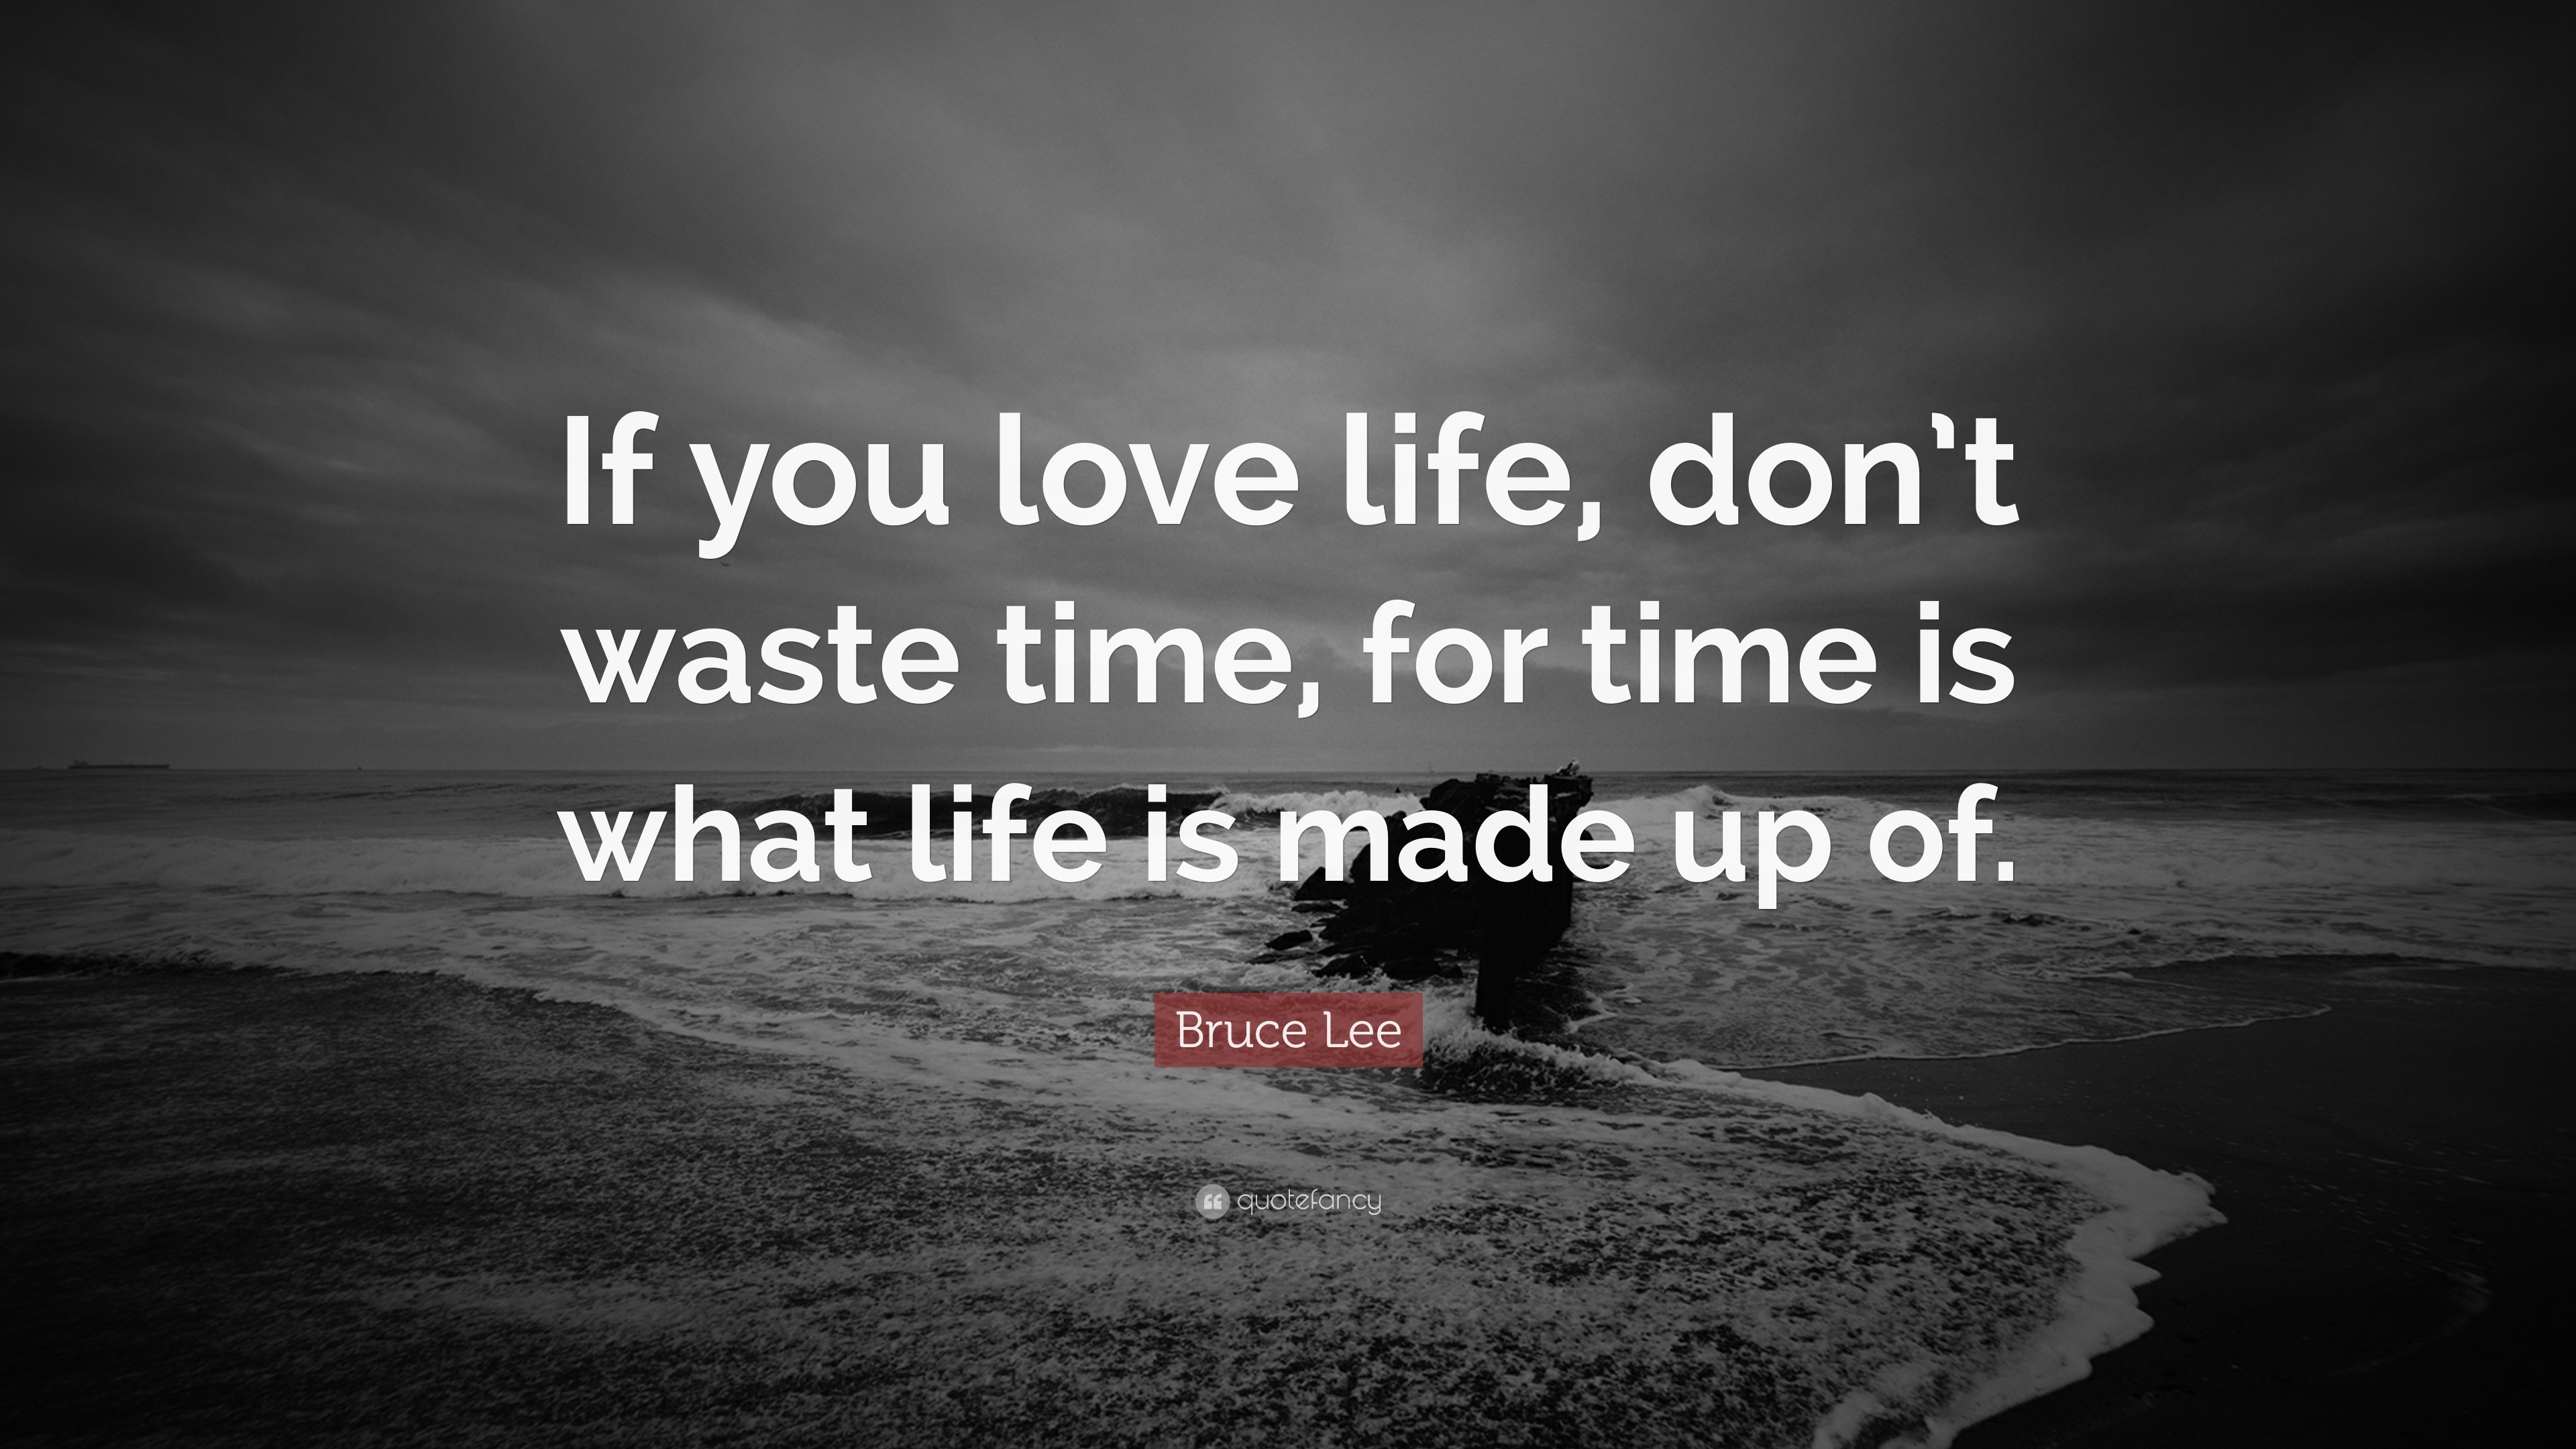 Bruce Lee Quote “If you love life don t waste time